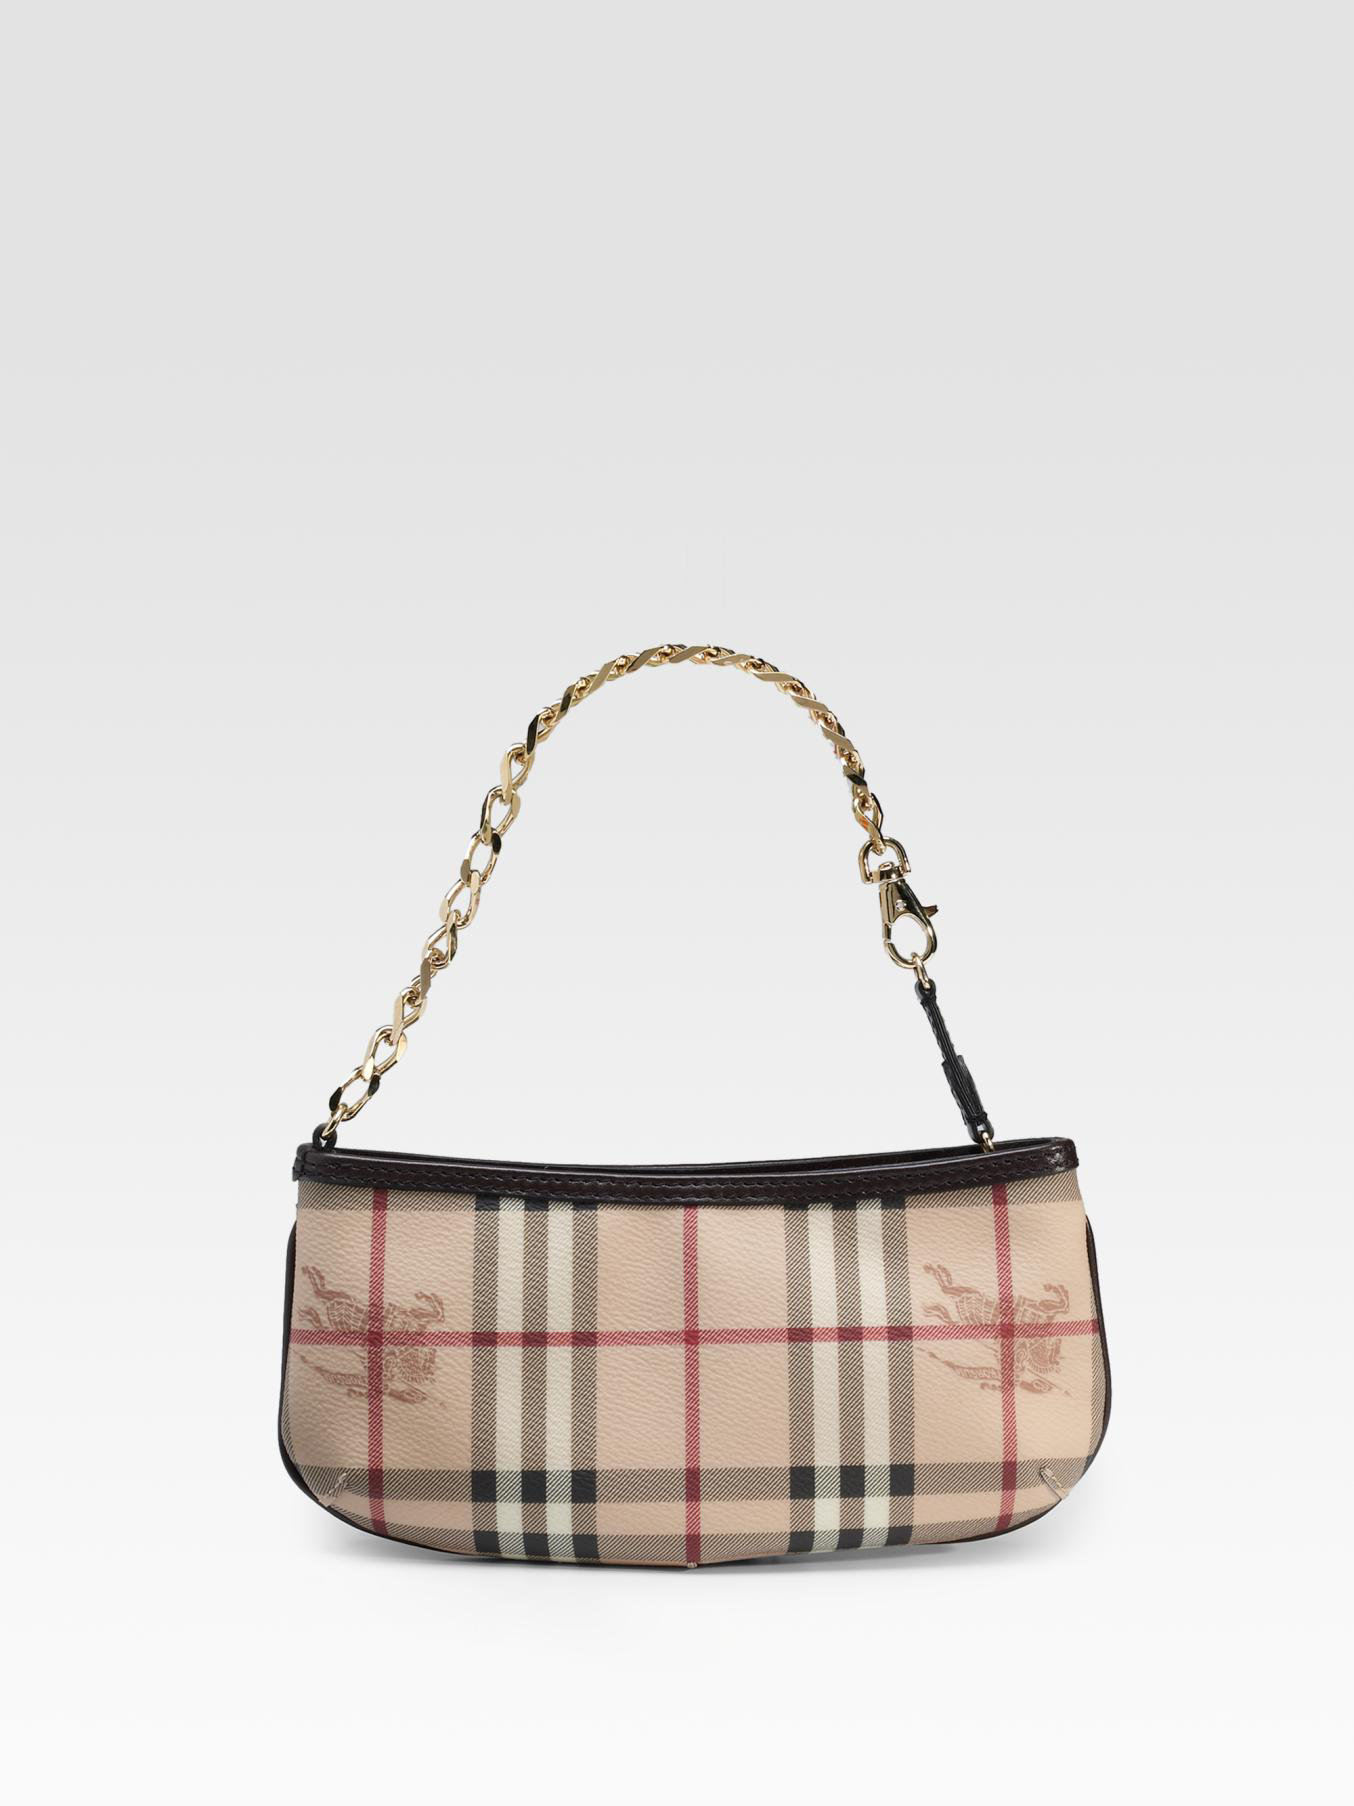 Burberry Check Wristlet in Natural | Lyst